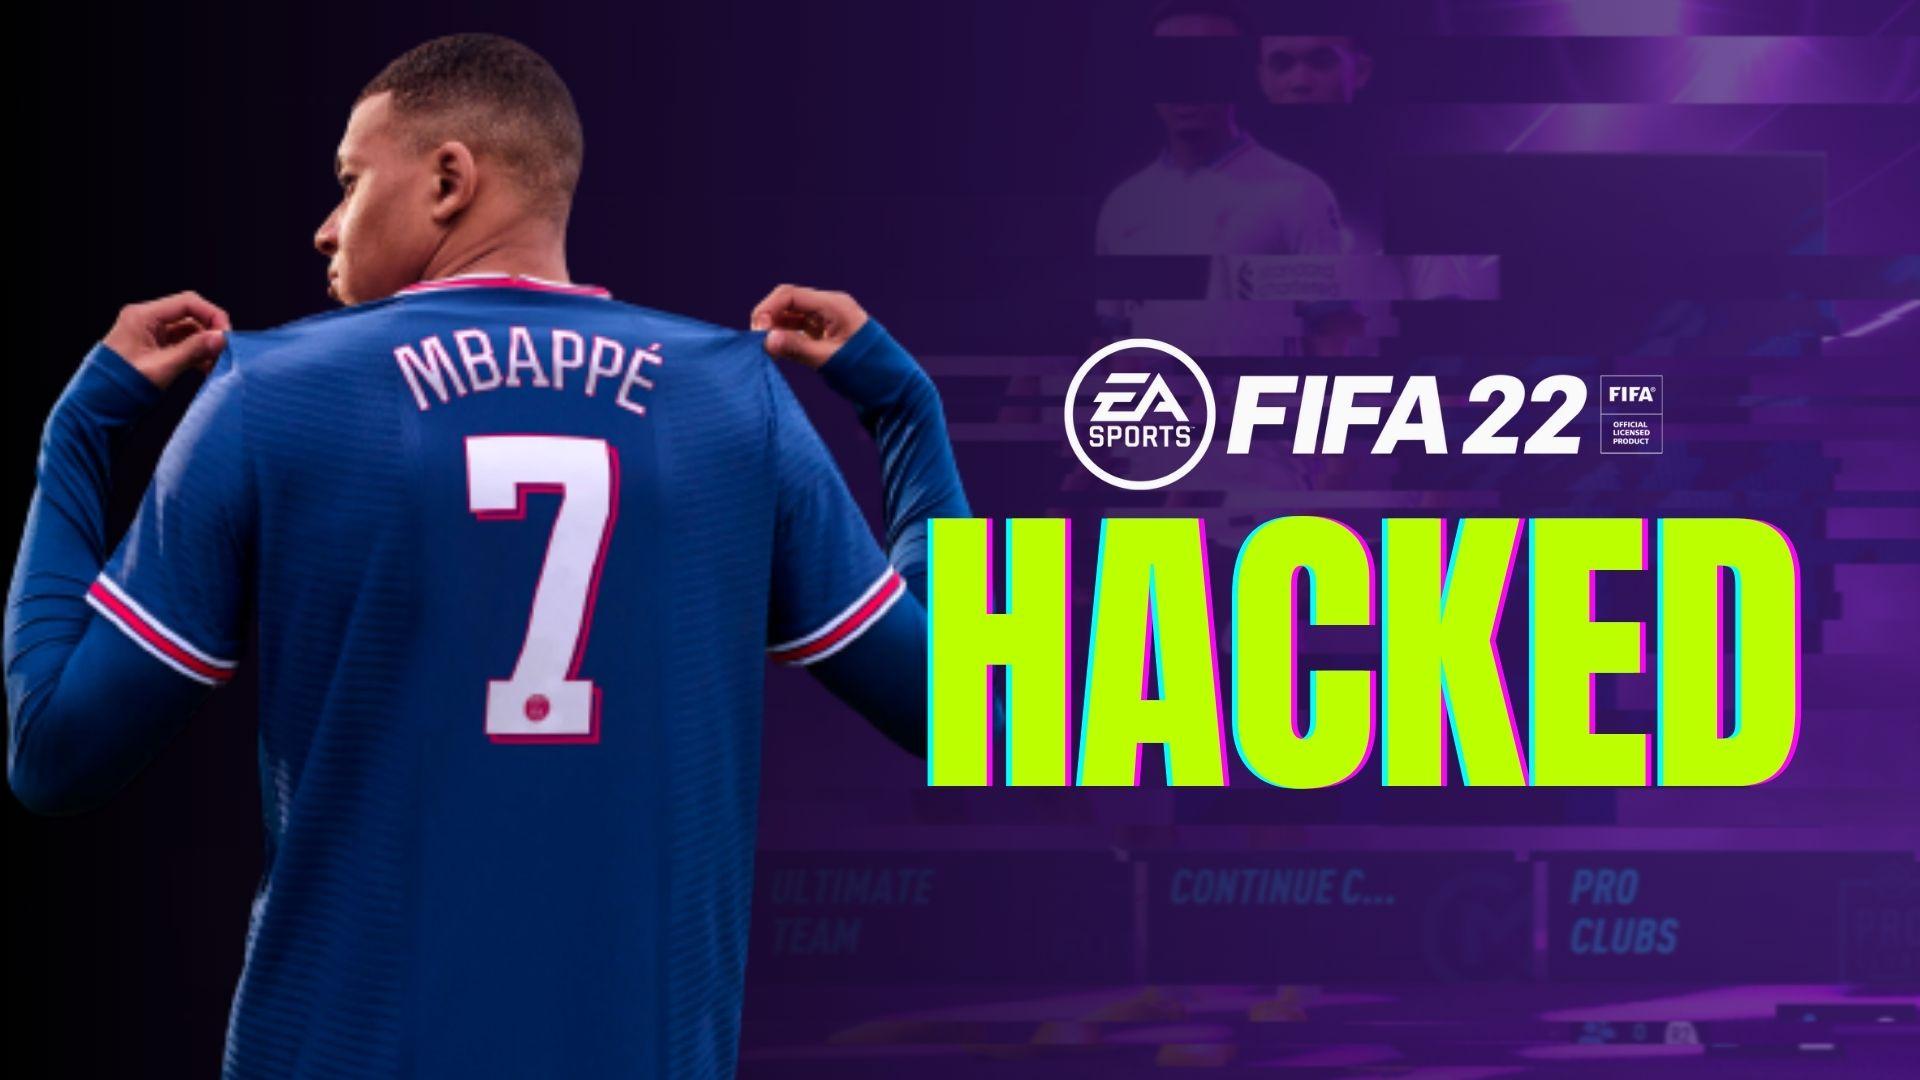 7 Fifa 21 tips from the pros who destroyed me